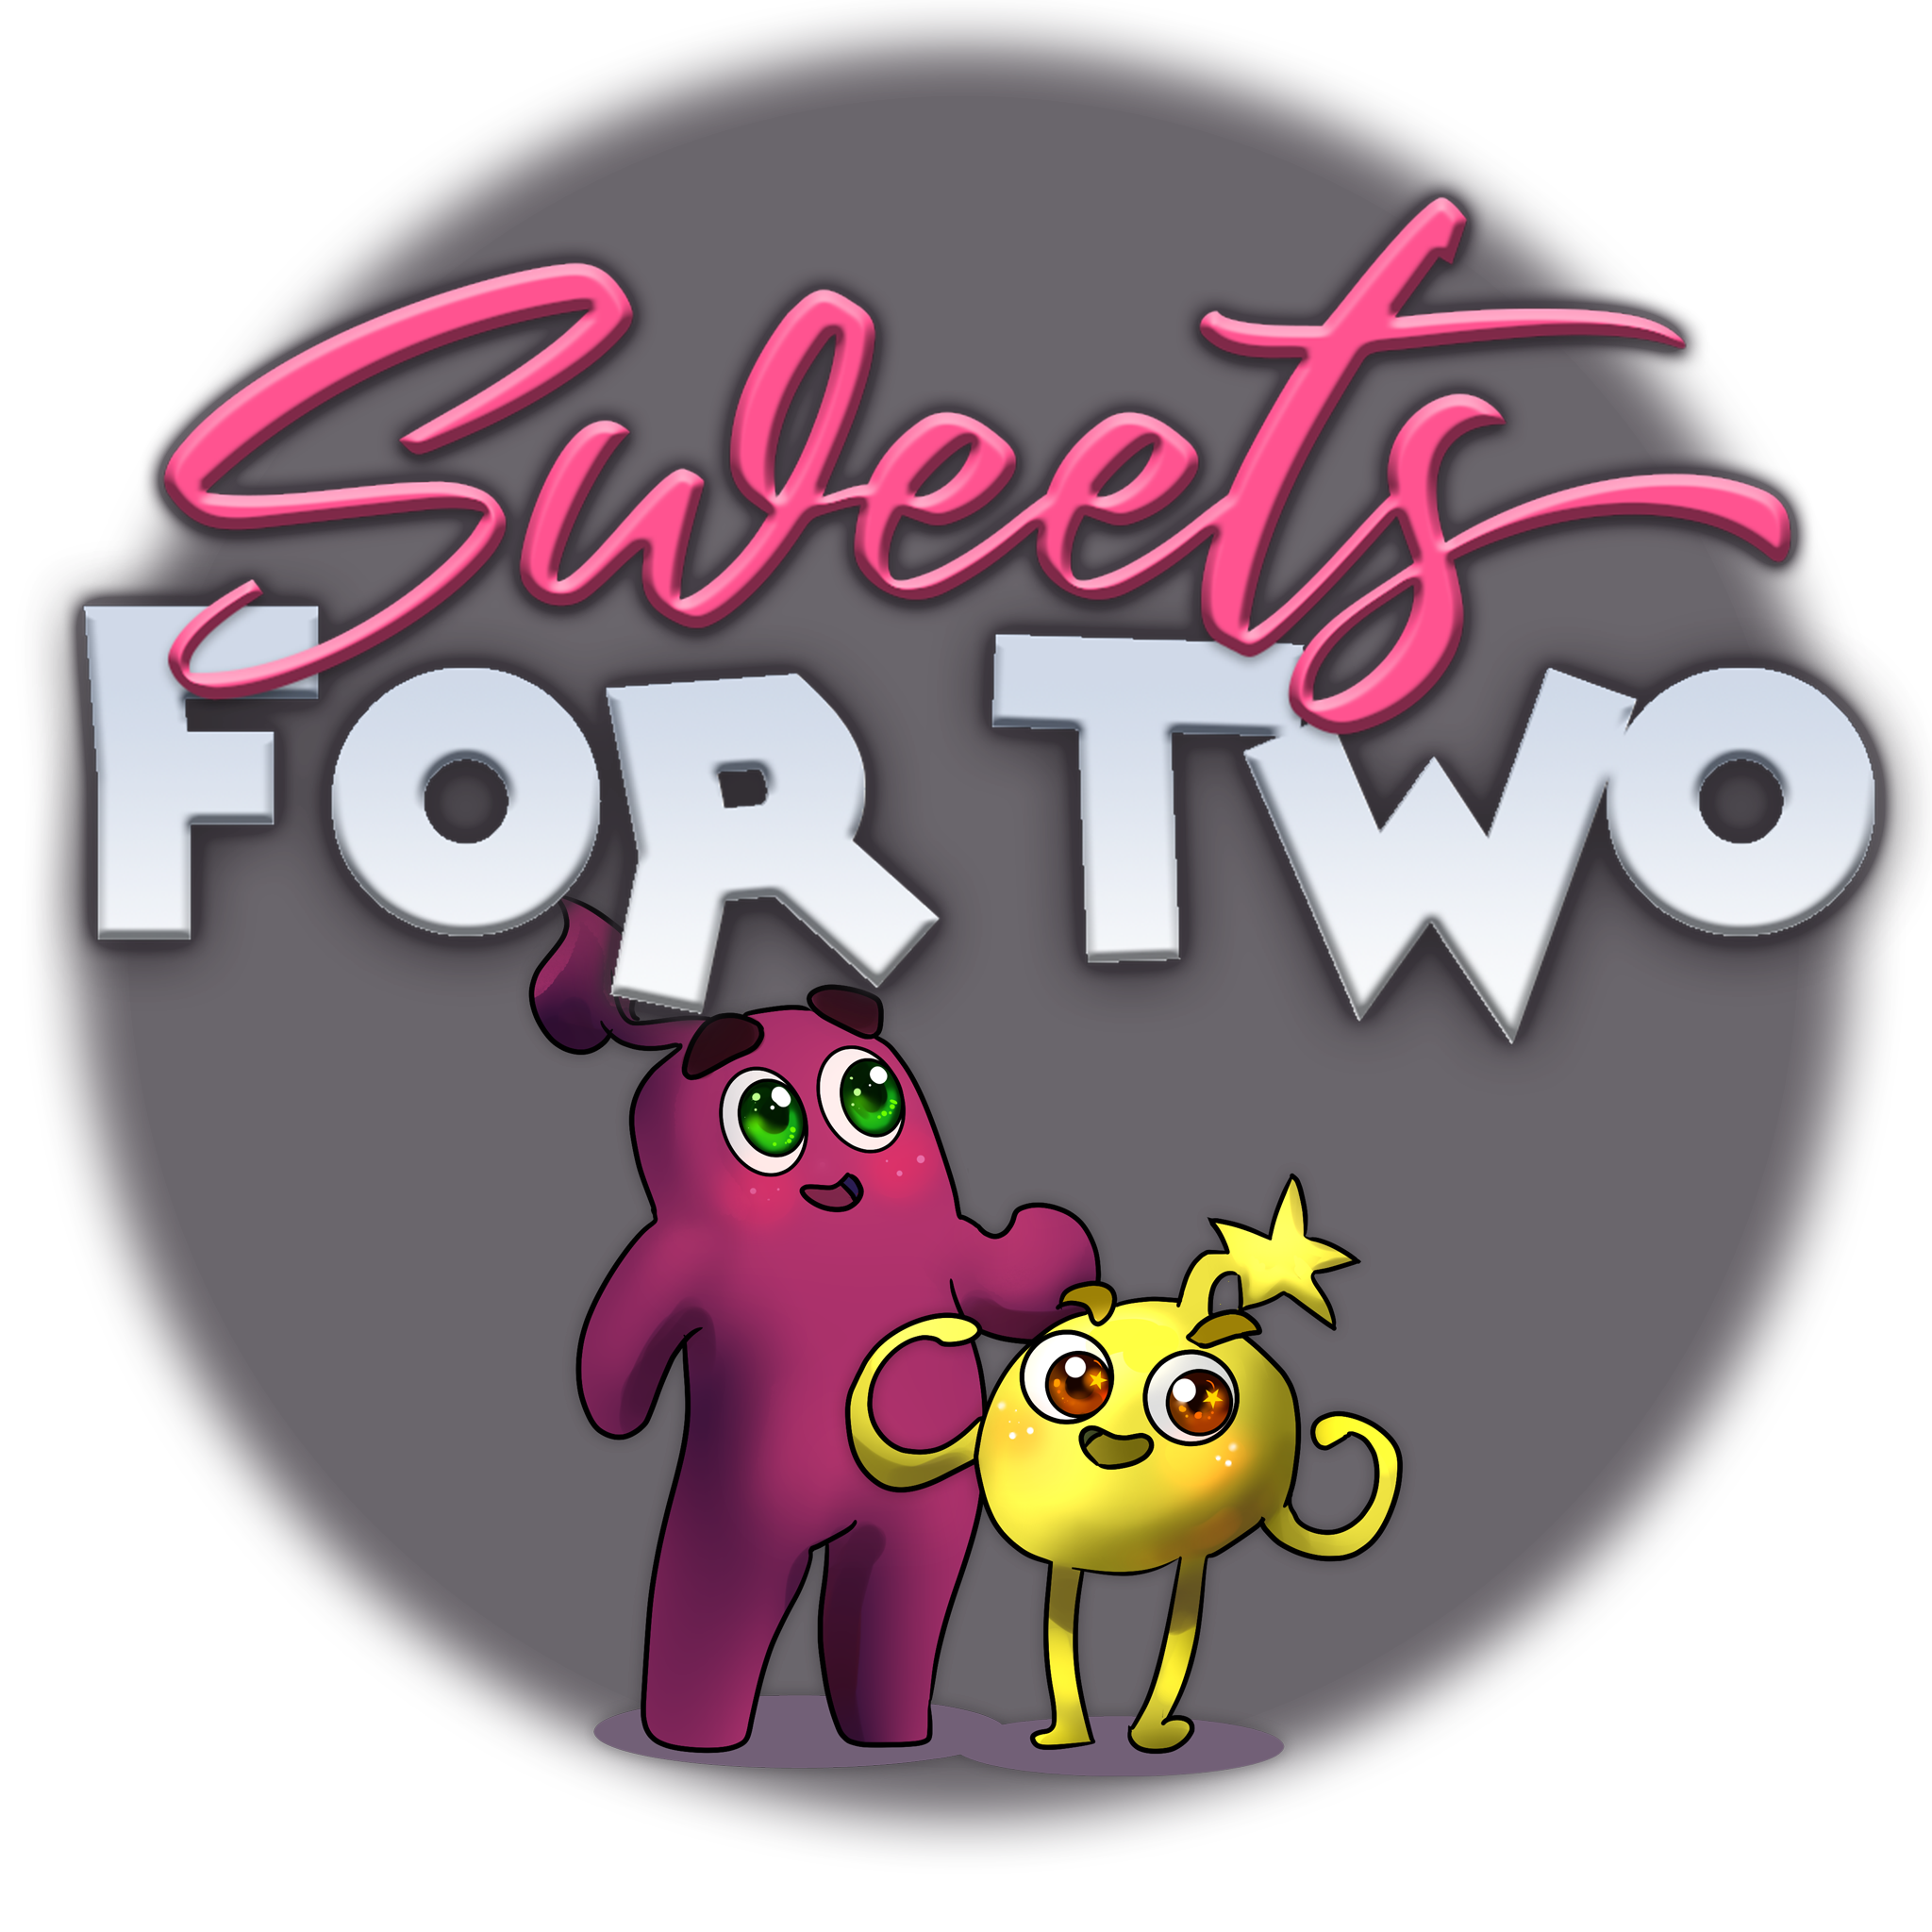 Sweets For Two